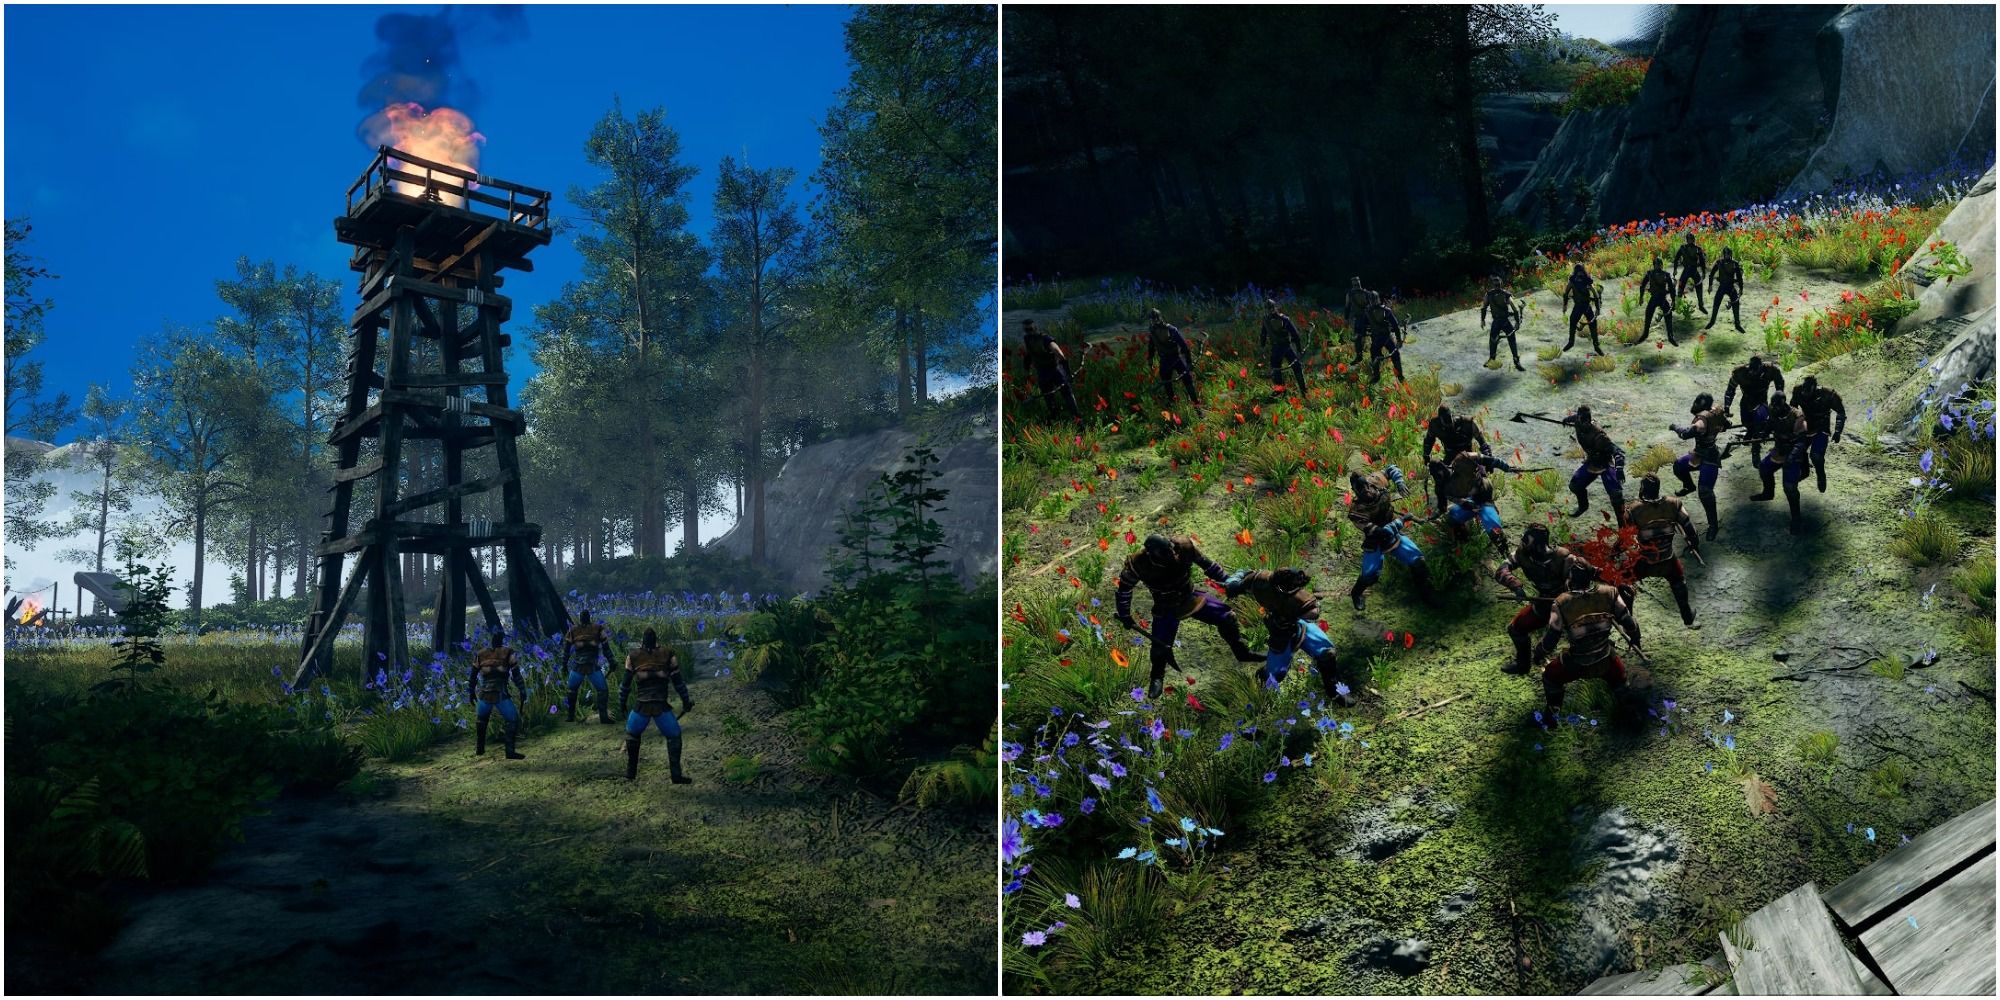 Frozenheim - collage of watchtower and a combat between Axemen and Archers